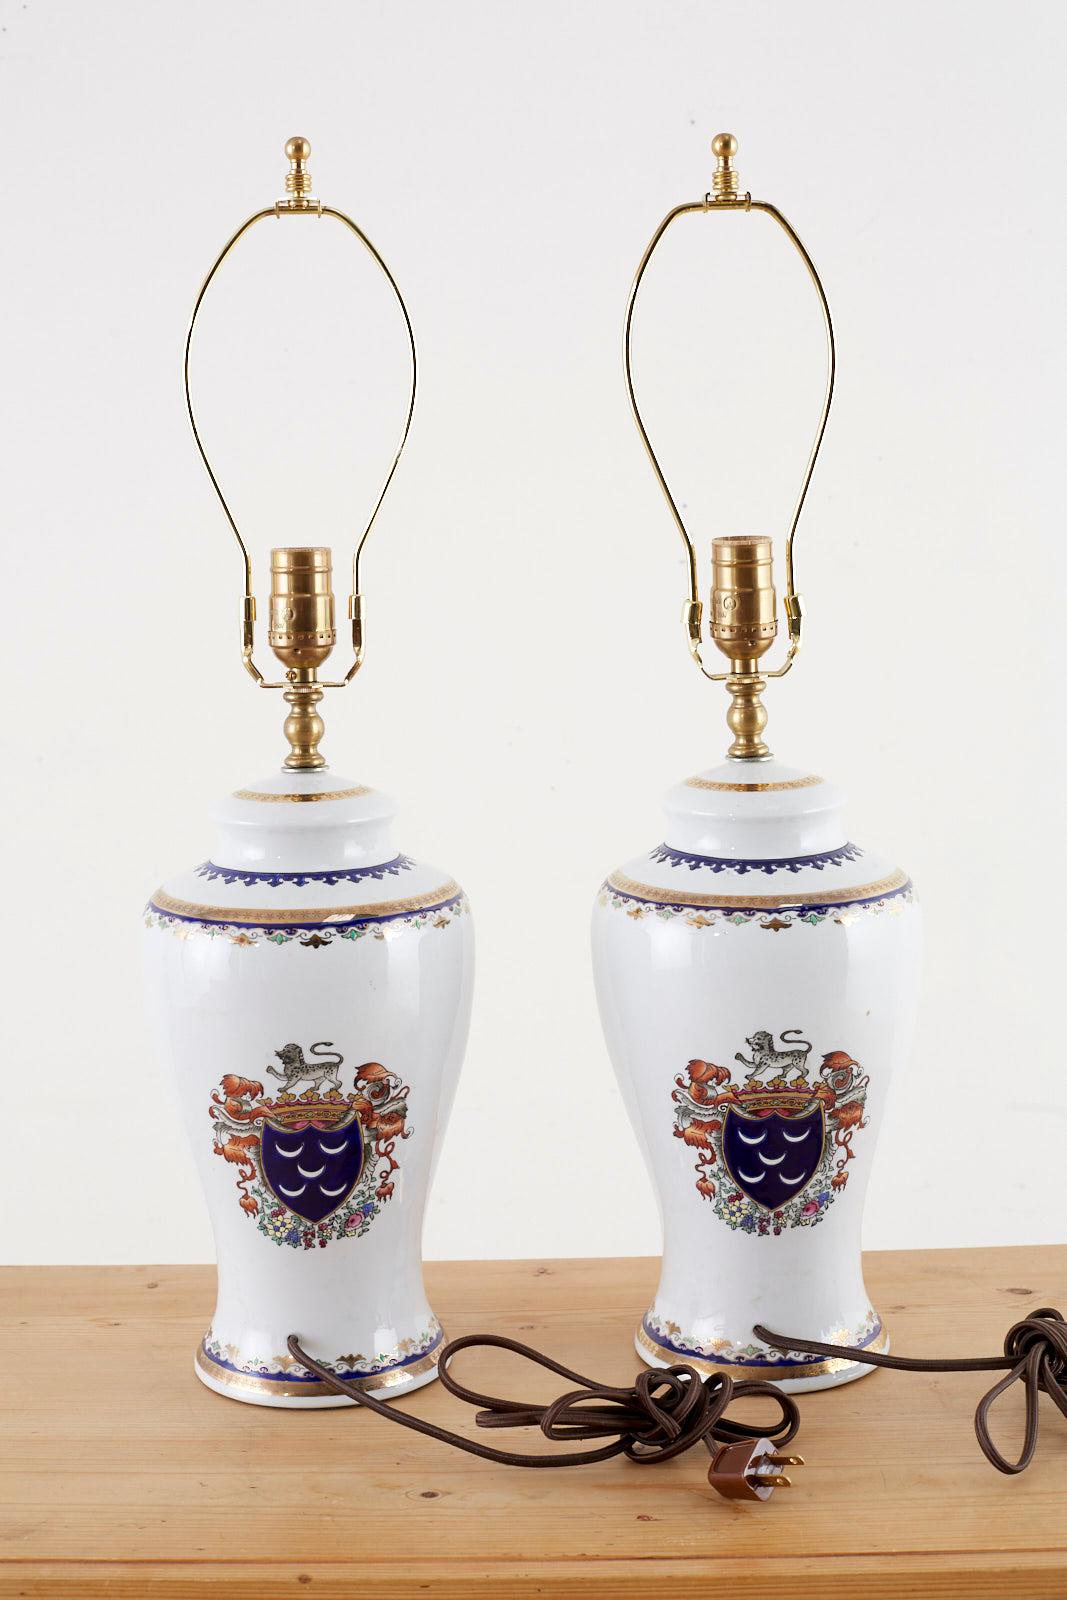 Brass Pair of Royal Coat of Arms Porcelain Jar Table Lamps